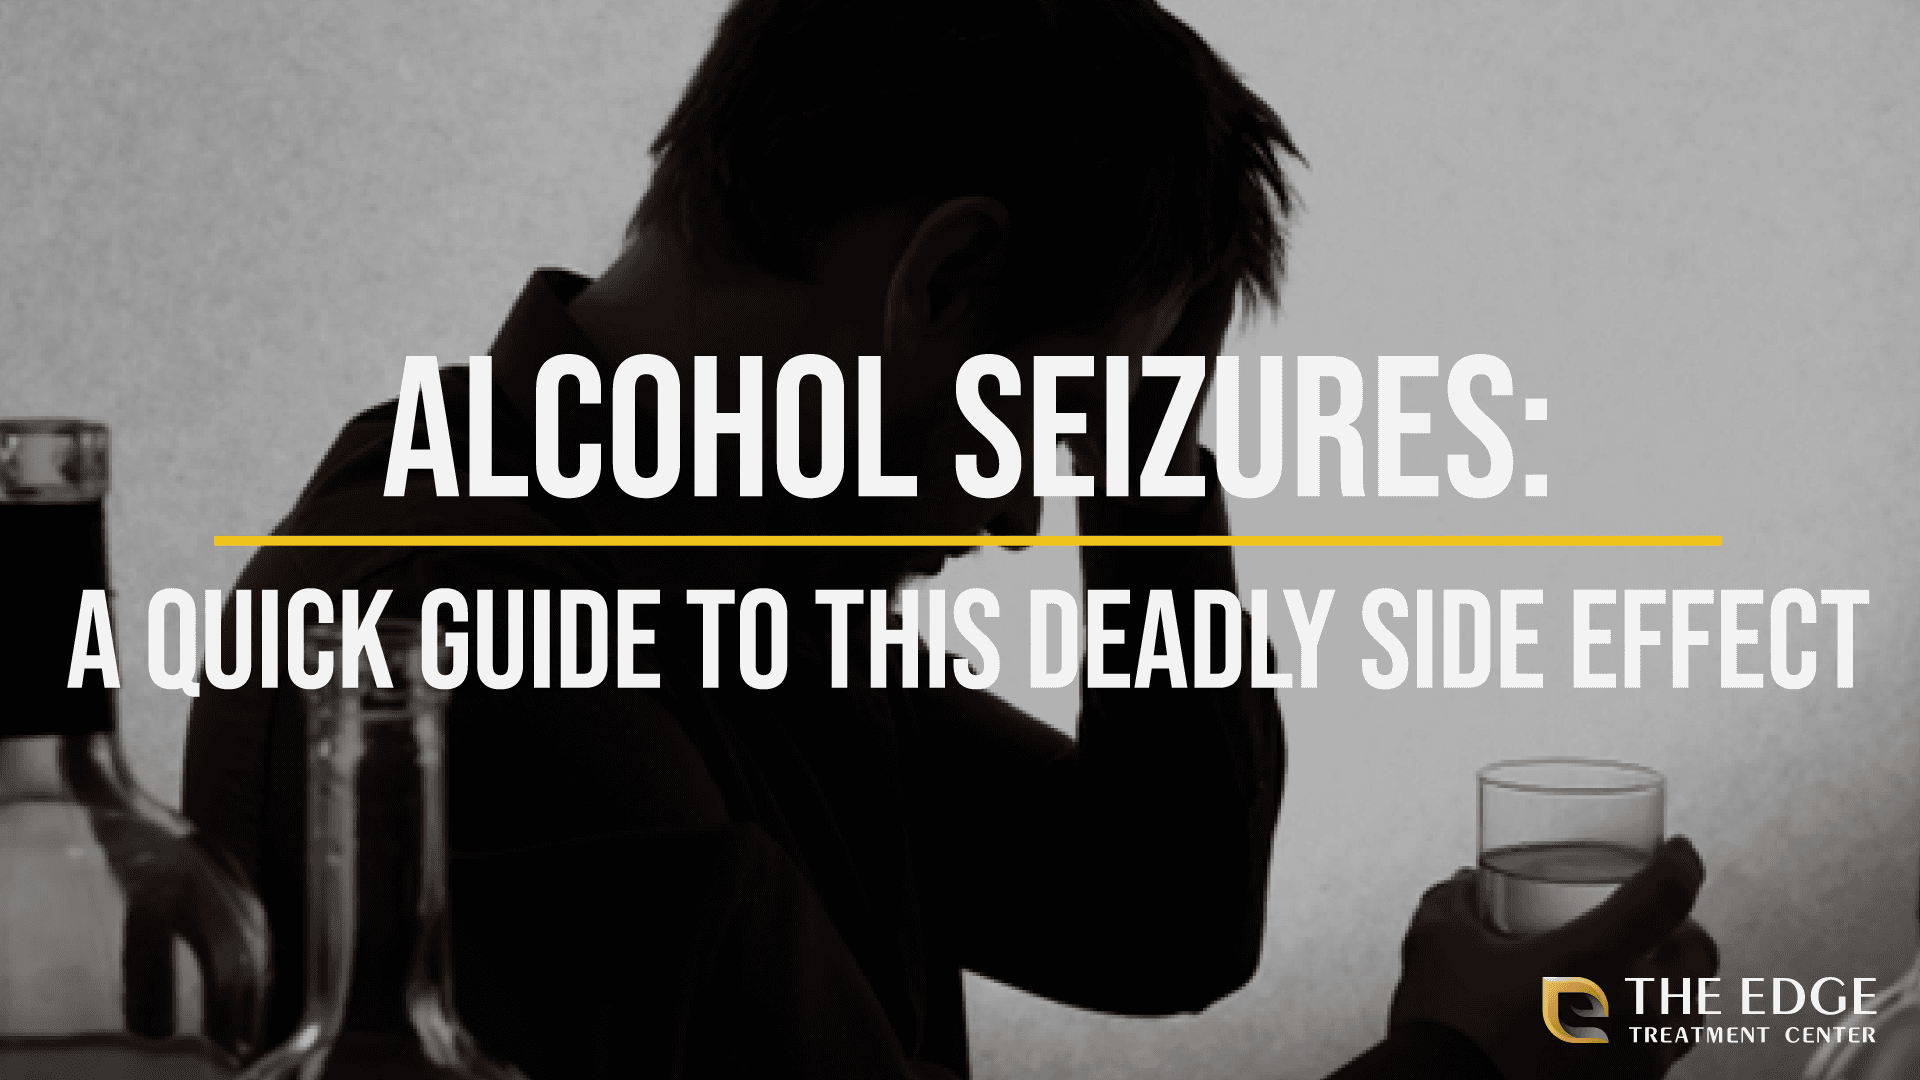 Get The Truth About Alcohol Seizures